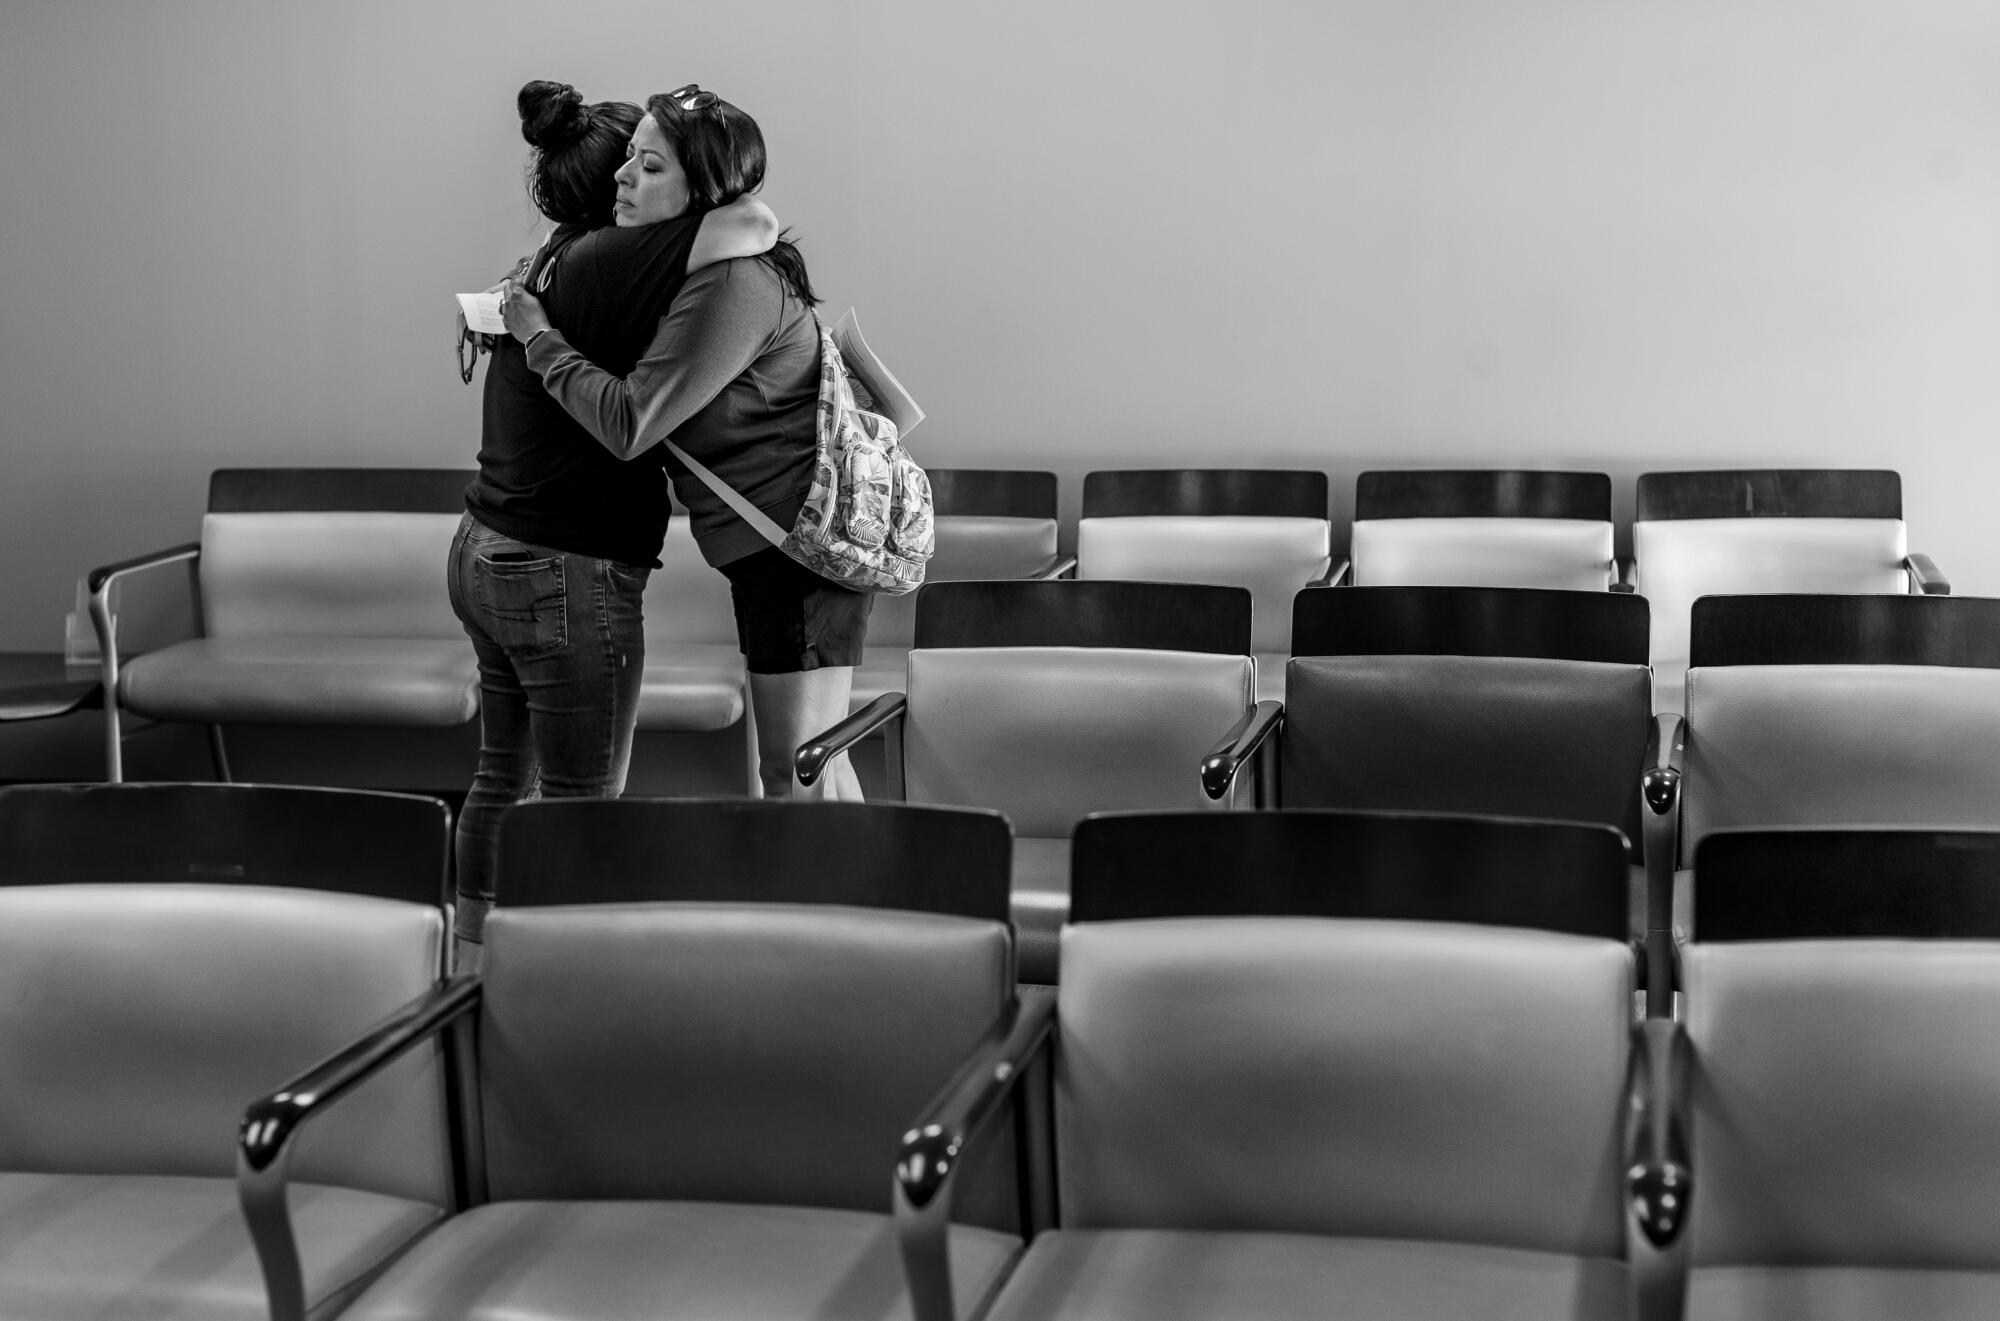 A teary staff member hugs a patient April Reese,41, after informing her the clinic could no longer provide abortion services 